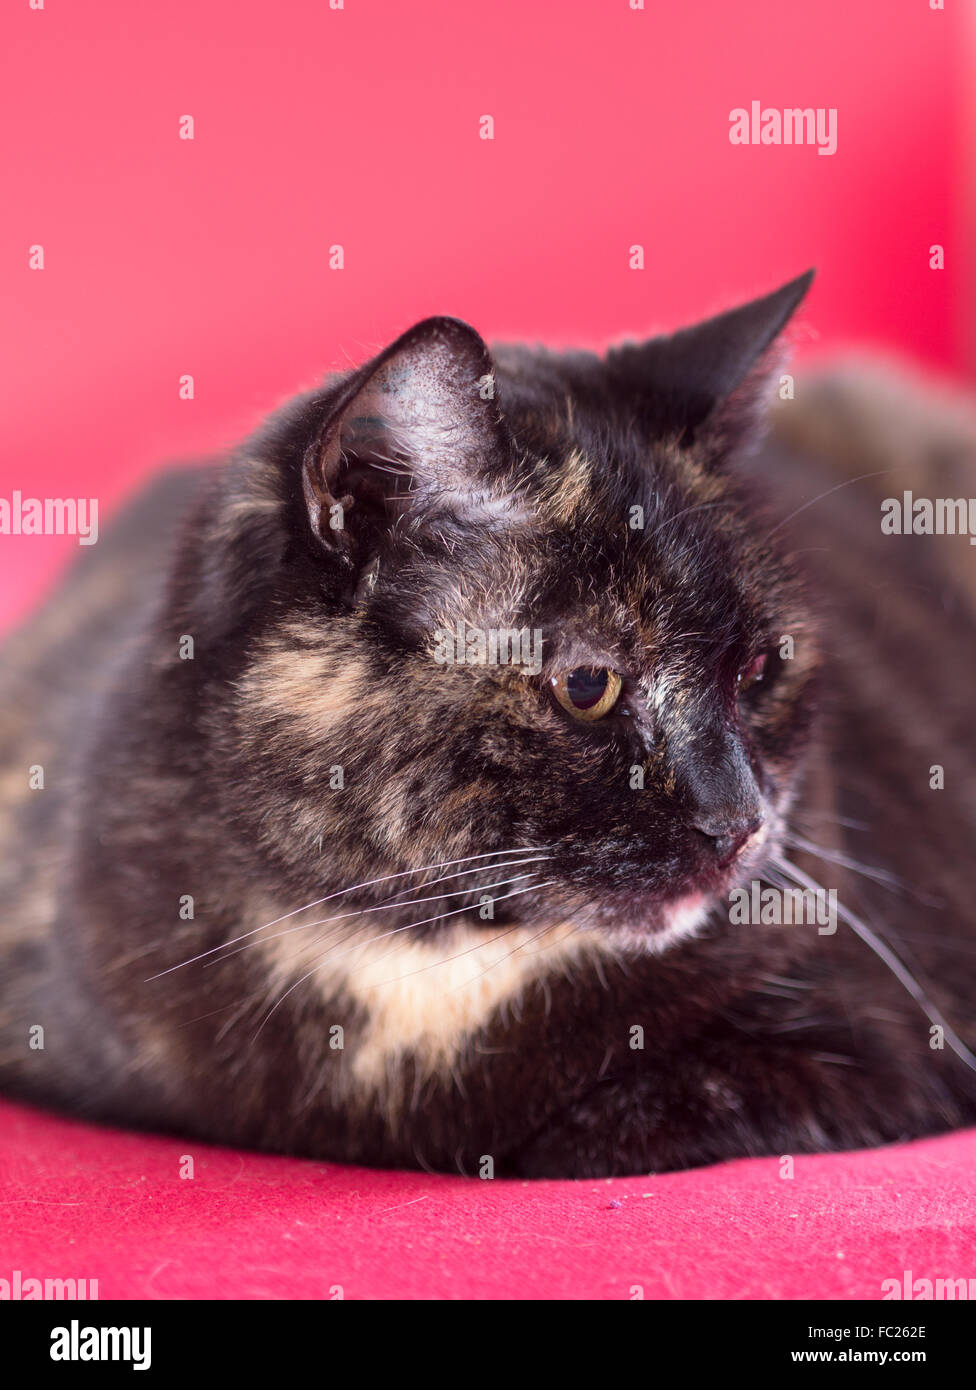 A cat looks attentively at her surroundings Stock Photo